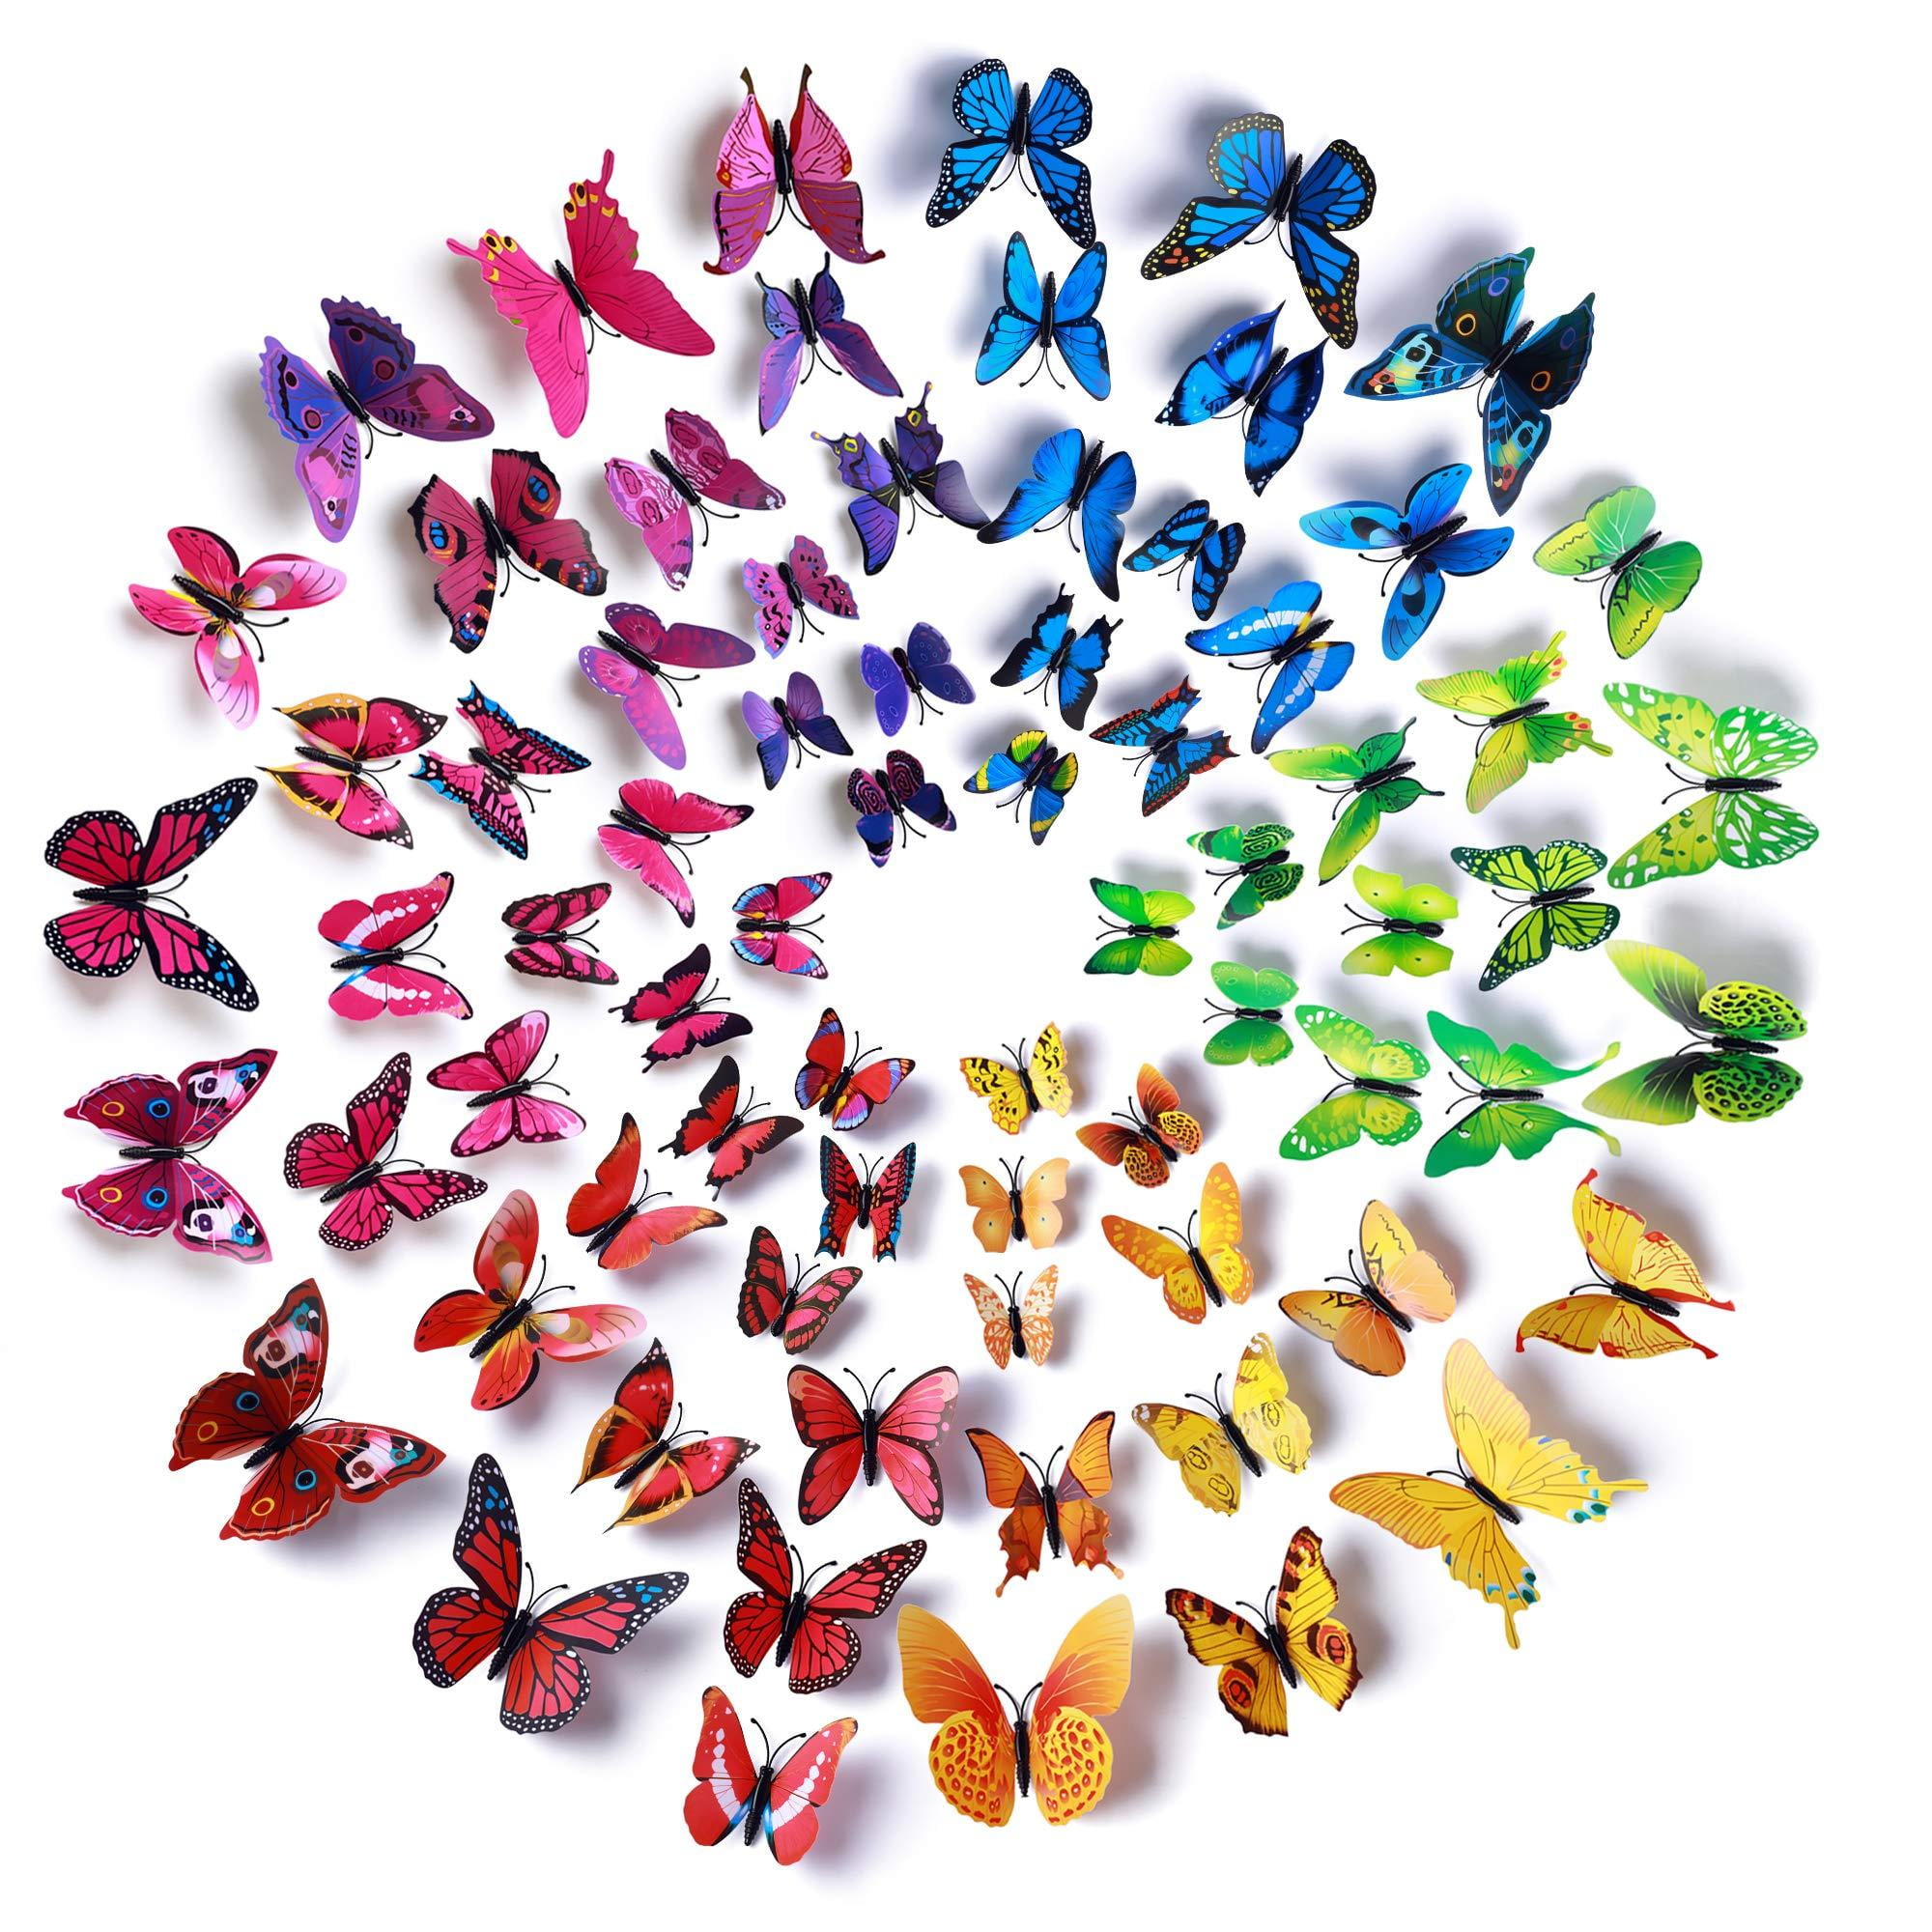 PGFUN 72PCS Colorful 3D Butterfly Luminous Wall Sticker Removable Mural Stickers DIY-Art Decor Handicraft Butterfly for Home Decoration Kids Room Bedroom Decor 